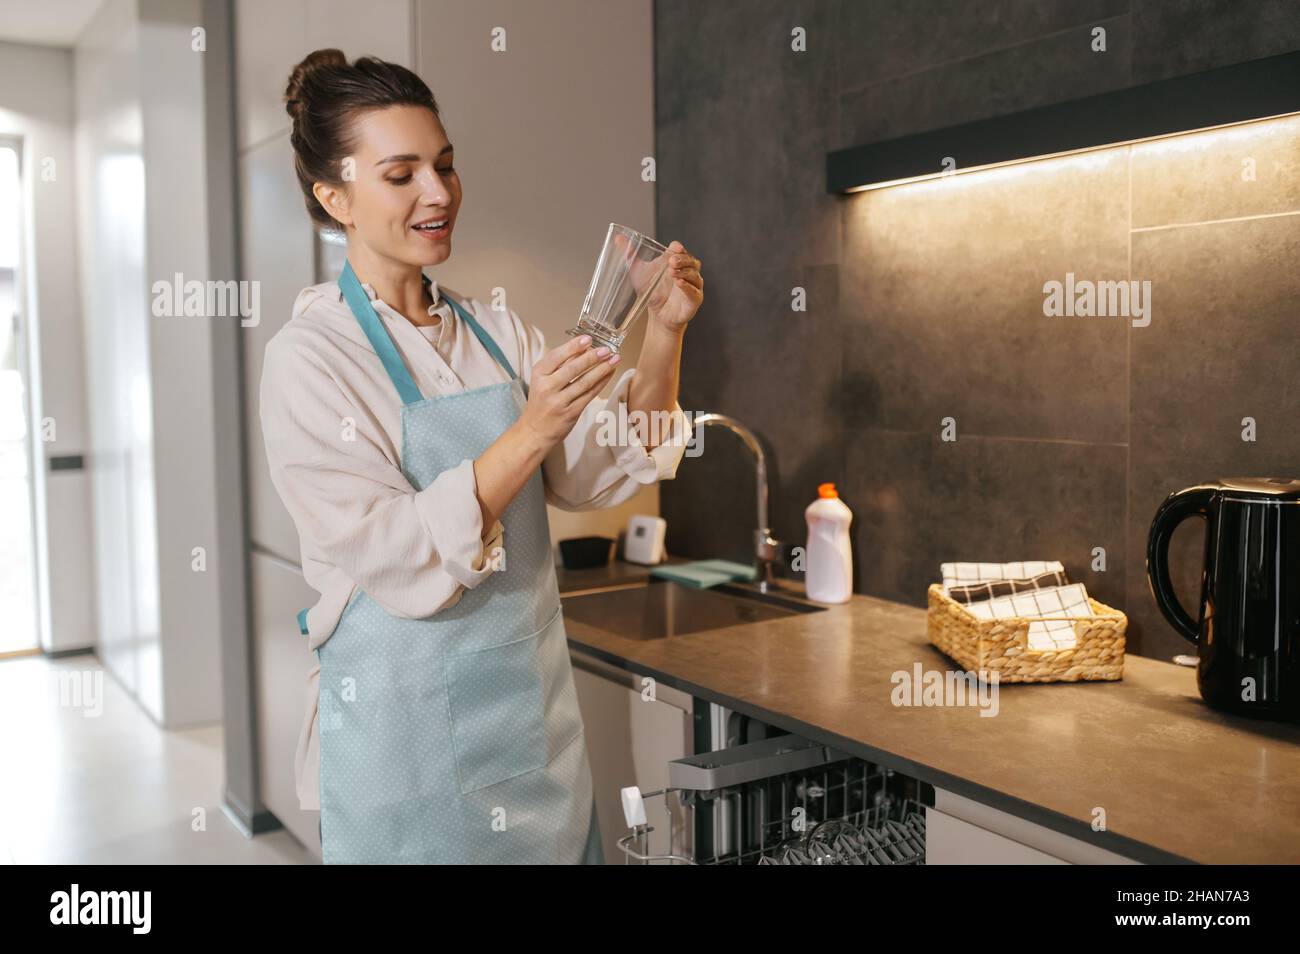 Woman holding glasses washed glaases and scrutinizing them Stock Photo